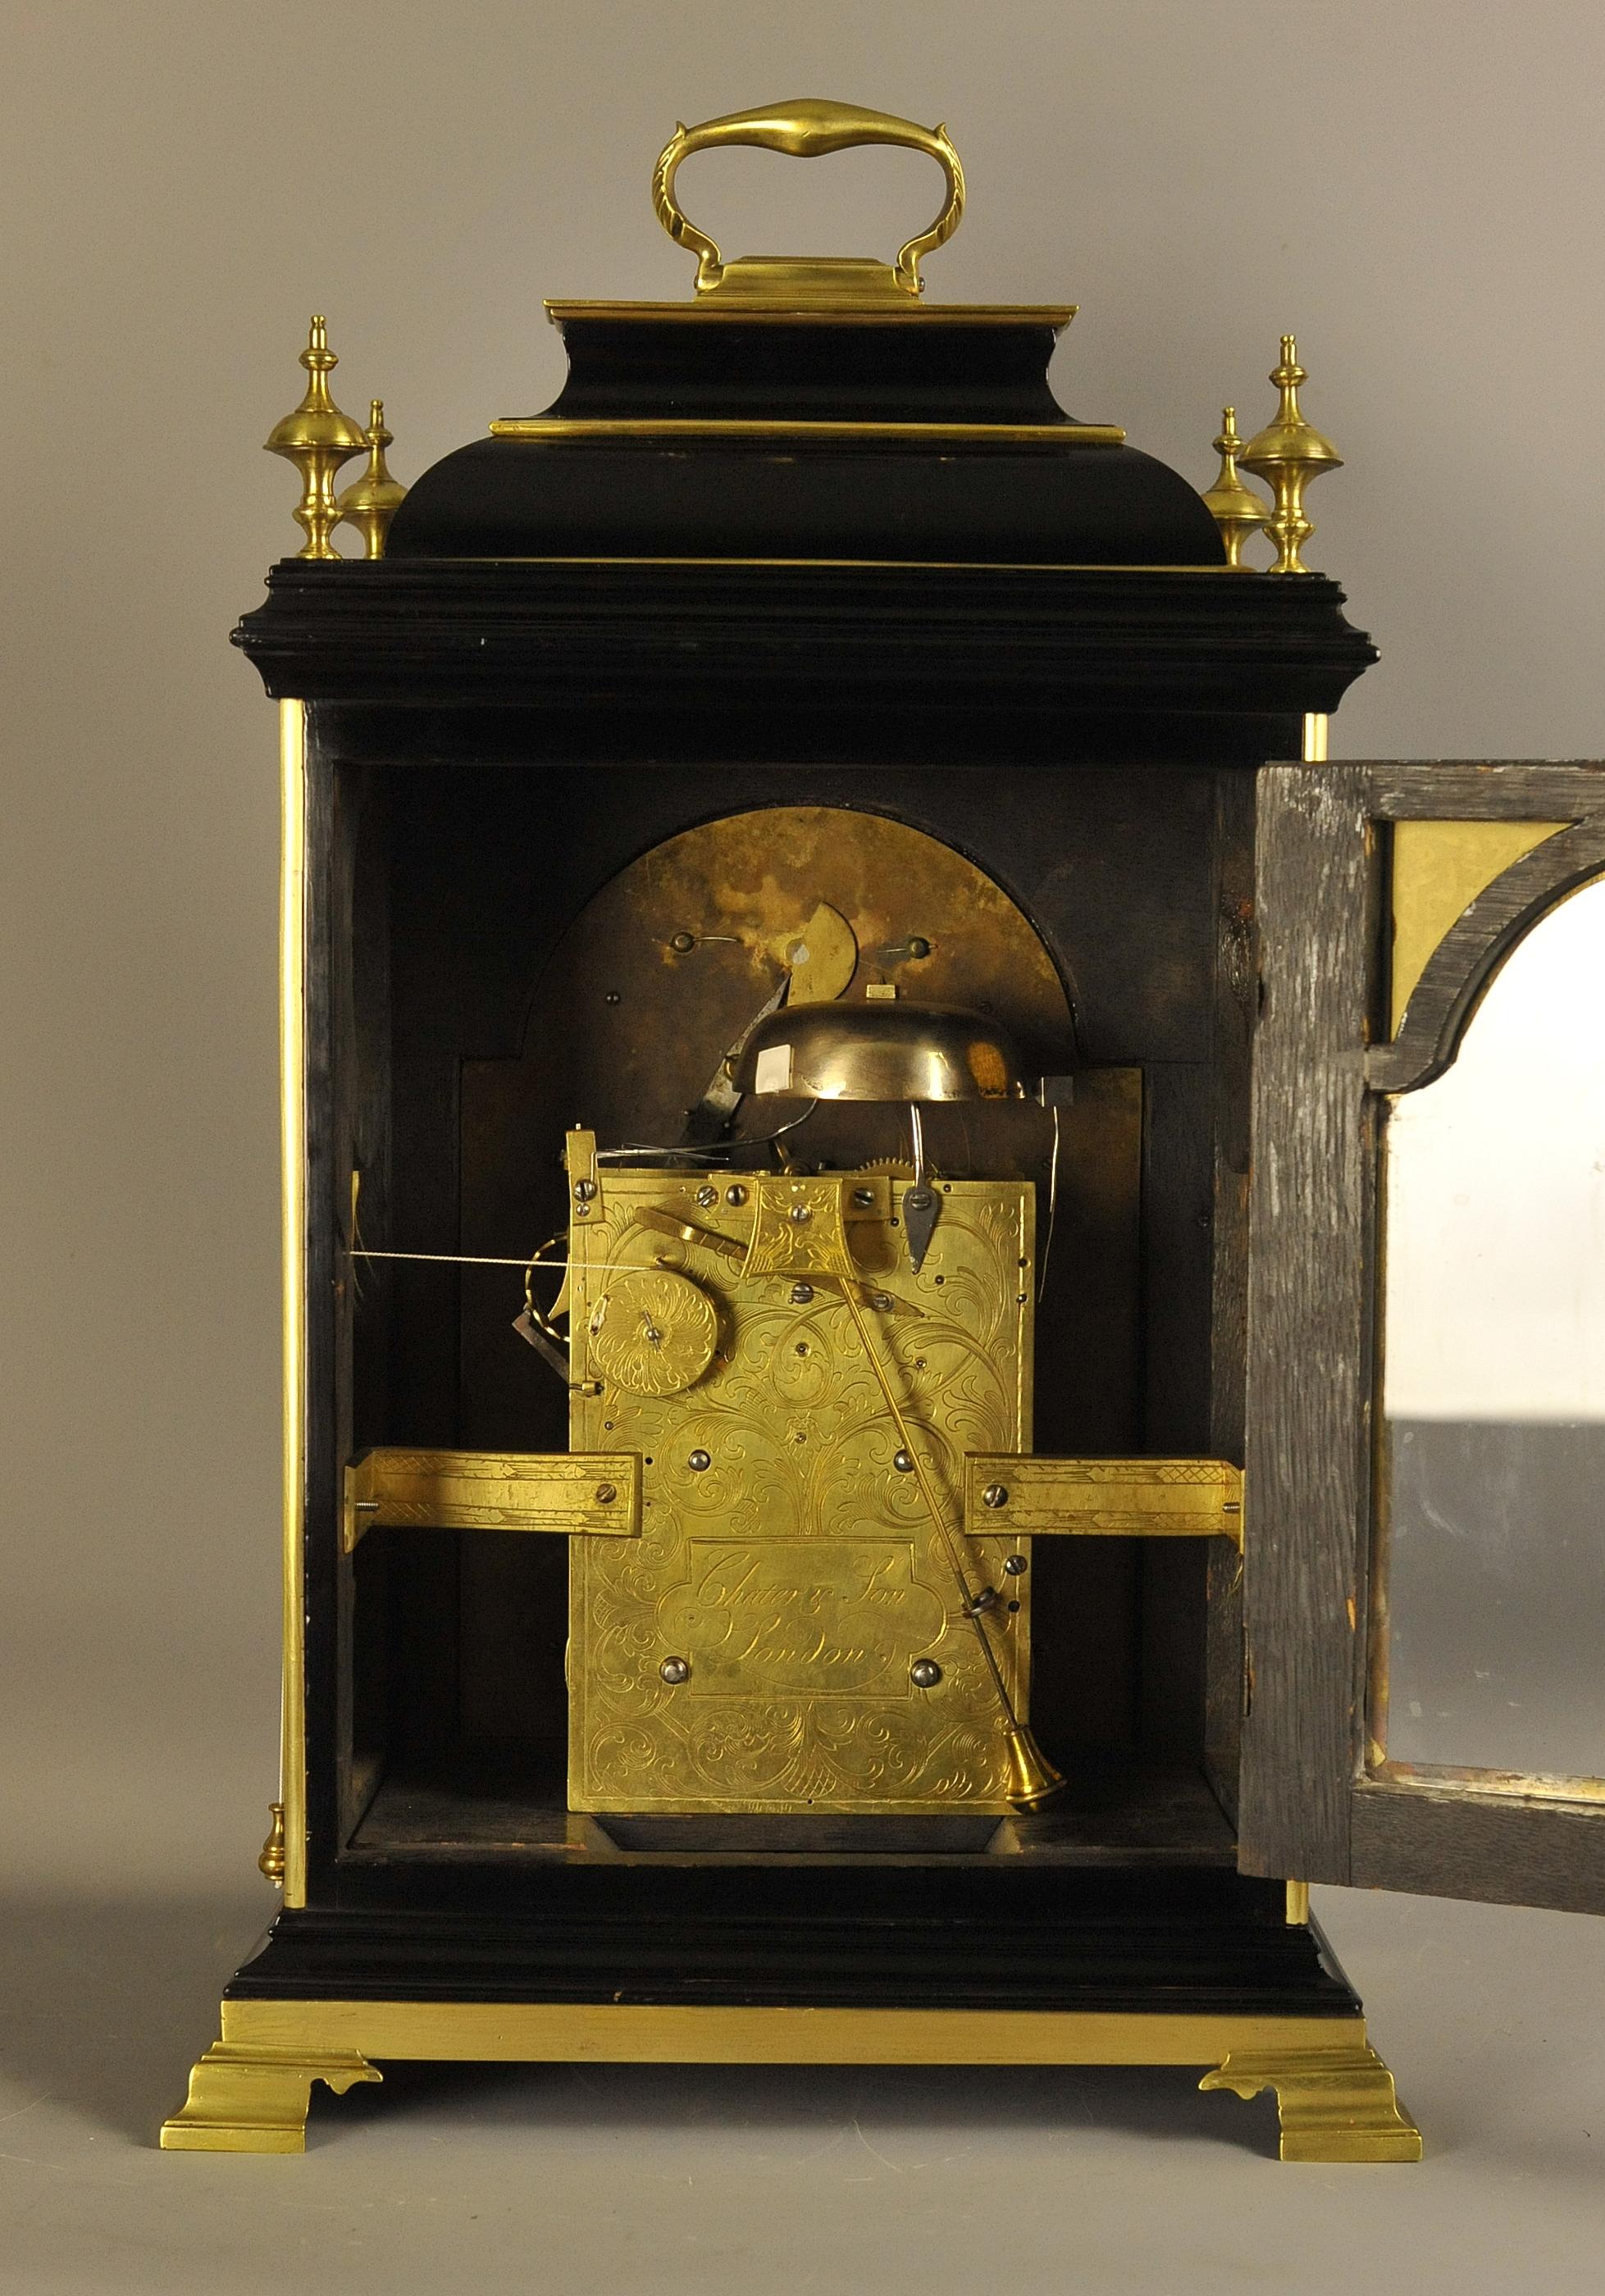 Mid-18th Century Fine Verge Bracket Clock with Alarm, Chater and Son, London For Sale